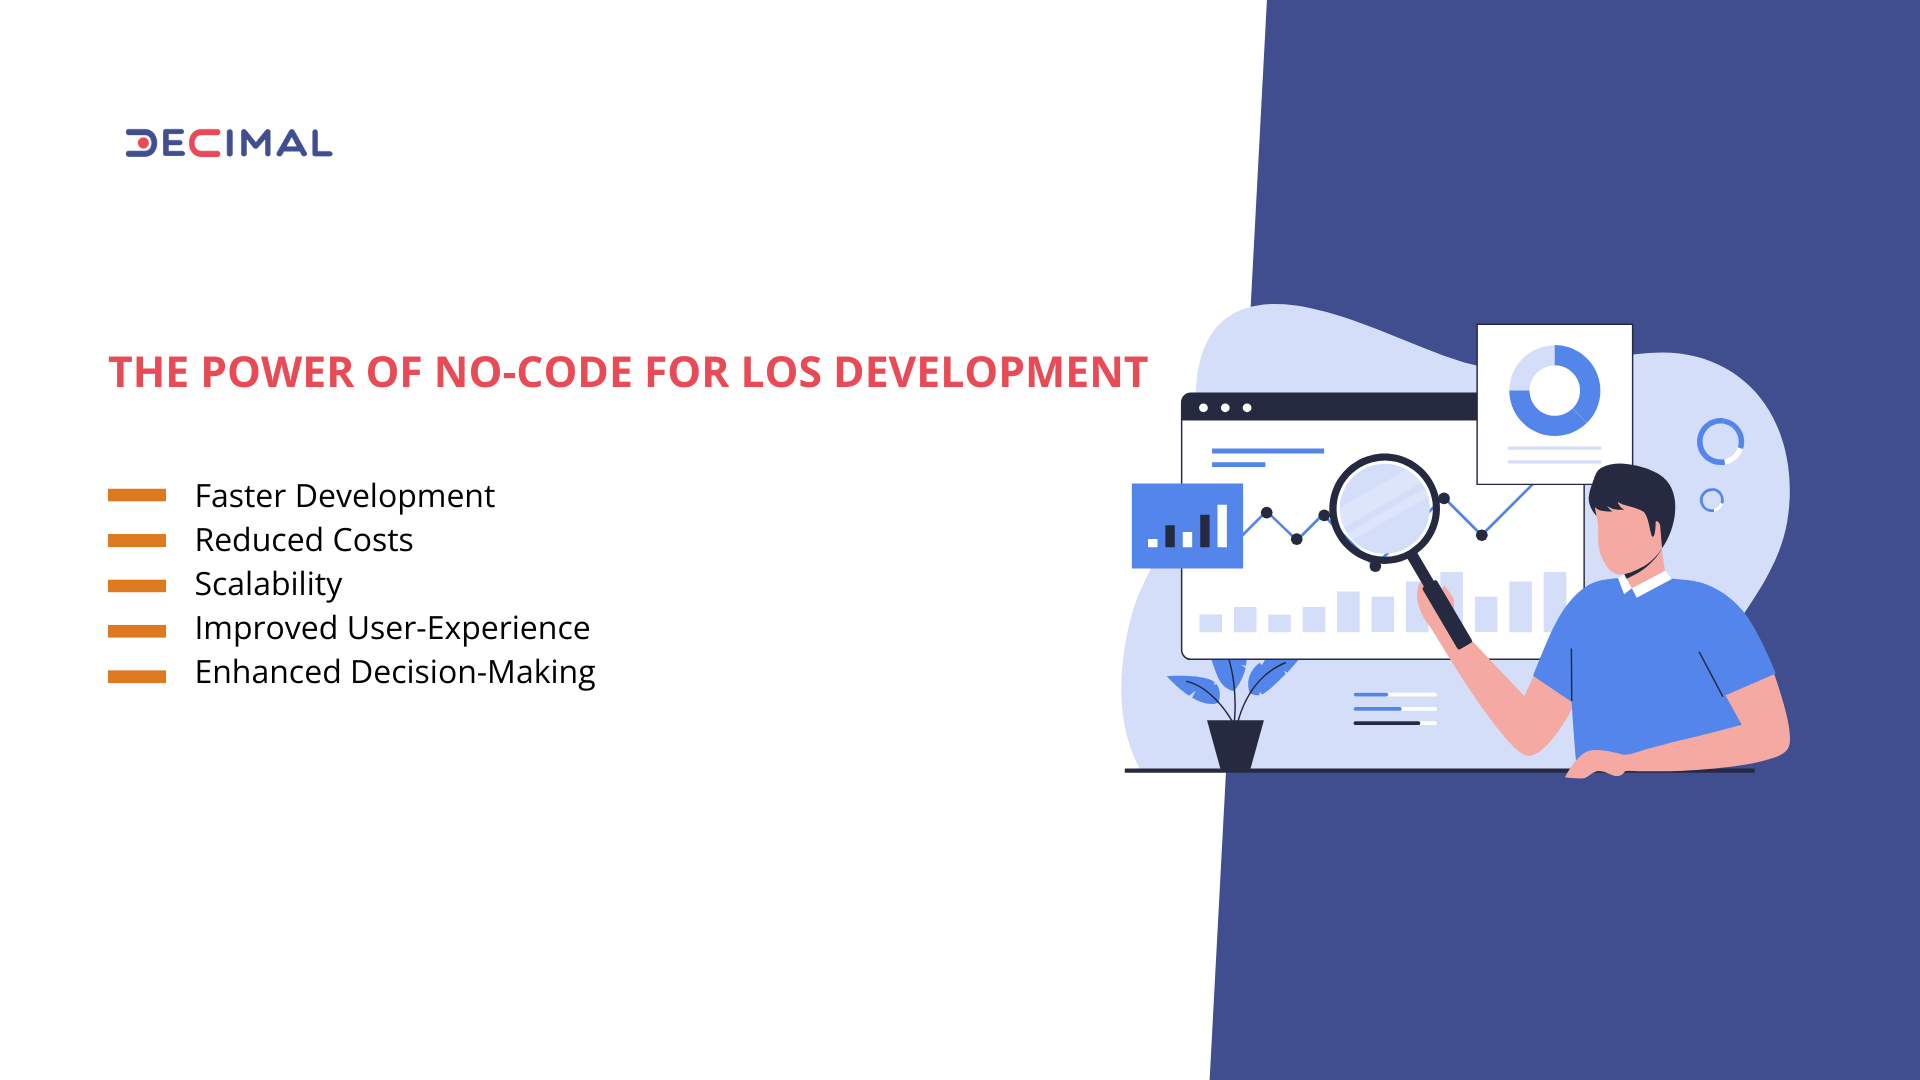 The Power of No-Code for LOS Development